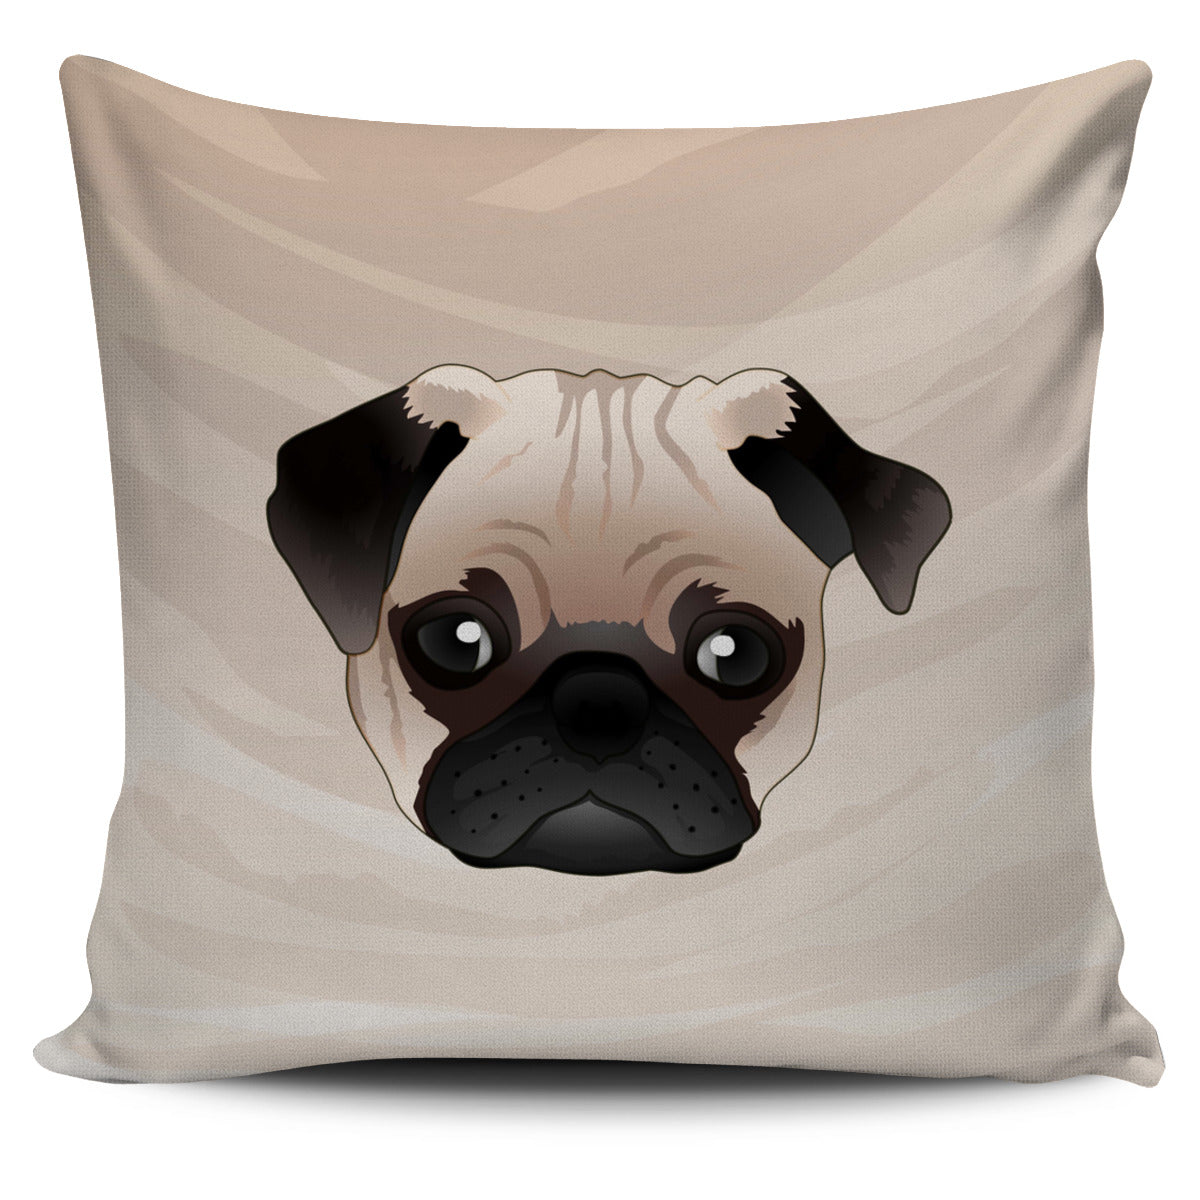 Real Fawn Pug Pillow Cover